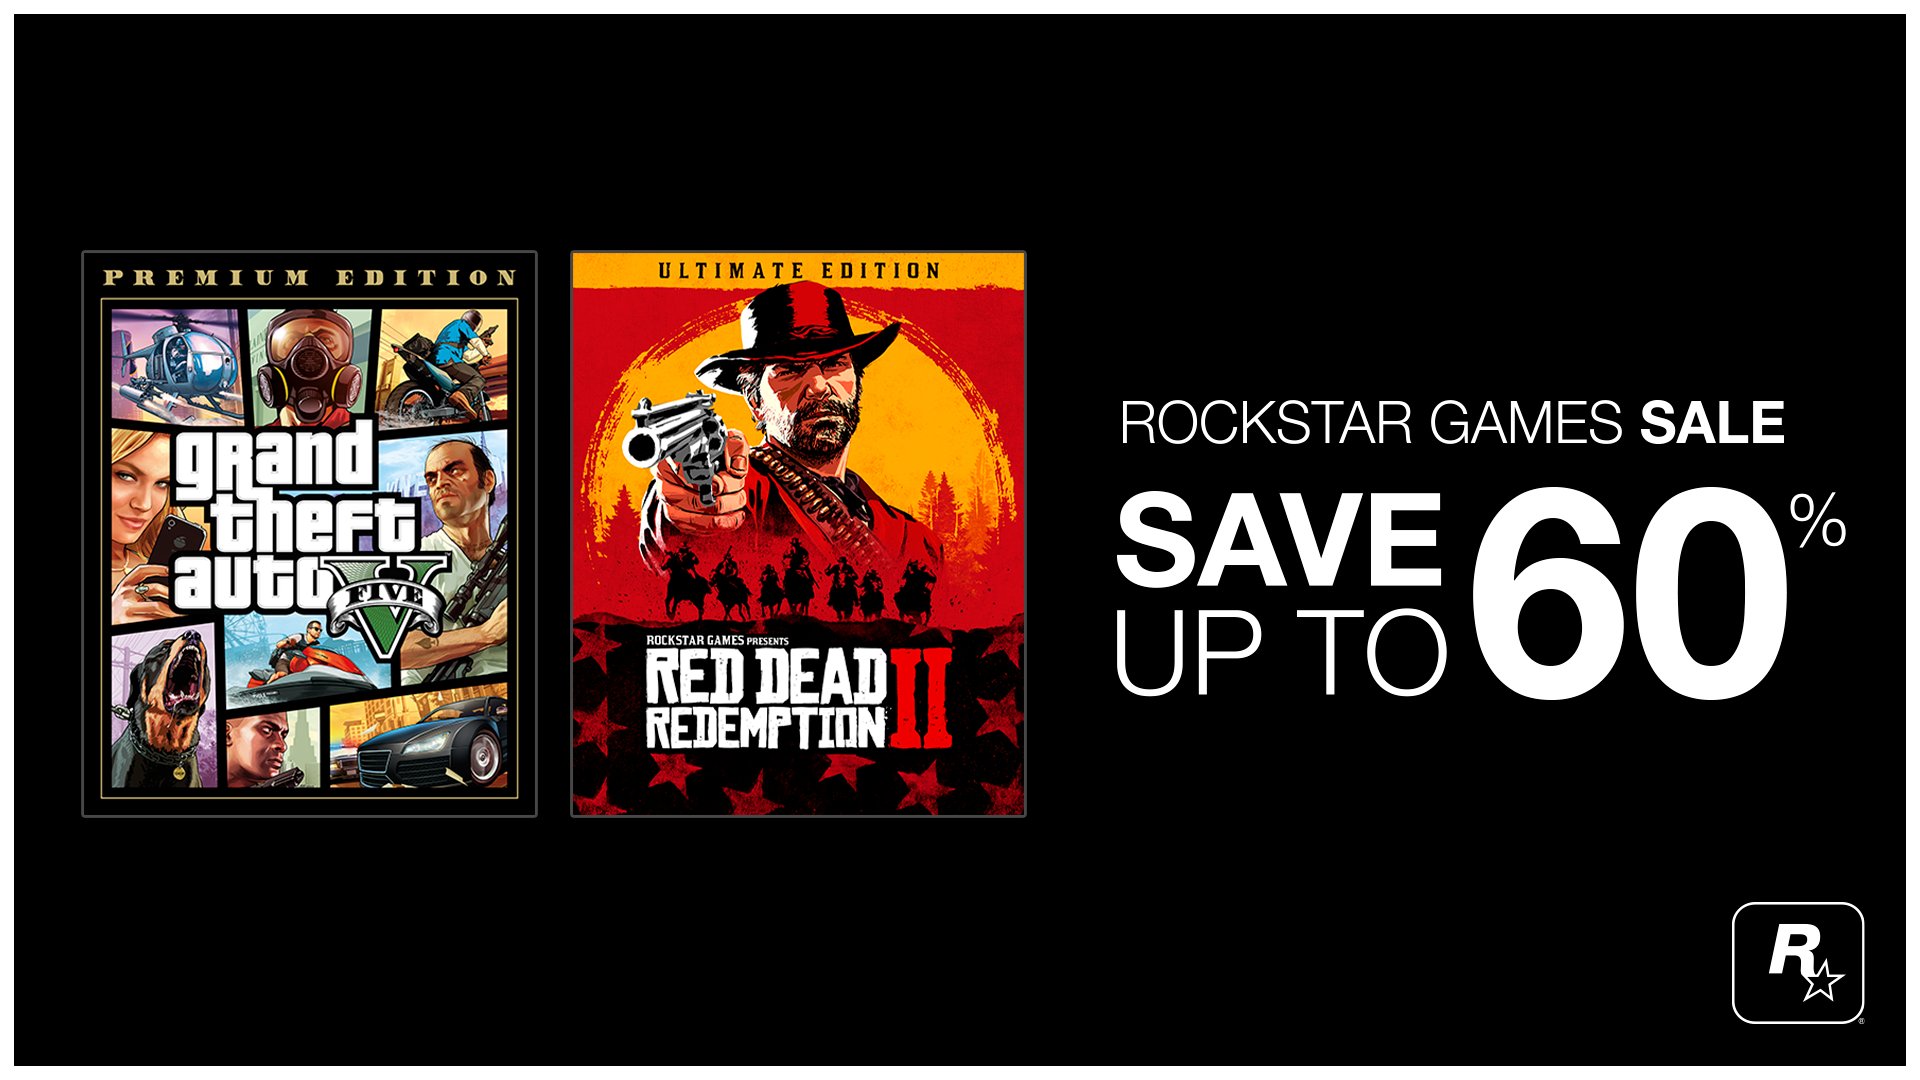 Epic Games Store Twitter: "Get up to 60% off Red Dead Redemption 2, and 50% off Red Dead Online or GTAV Premium Edition. Now through October 4! https://t.co/wJs2w1qhhf https://t.co/8jvuCdAJvP" / Twitter